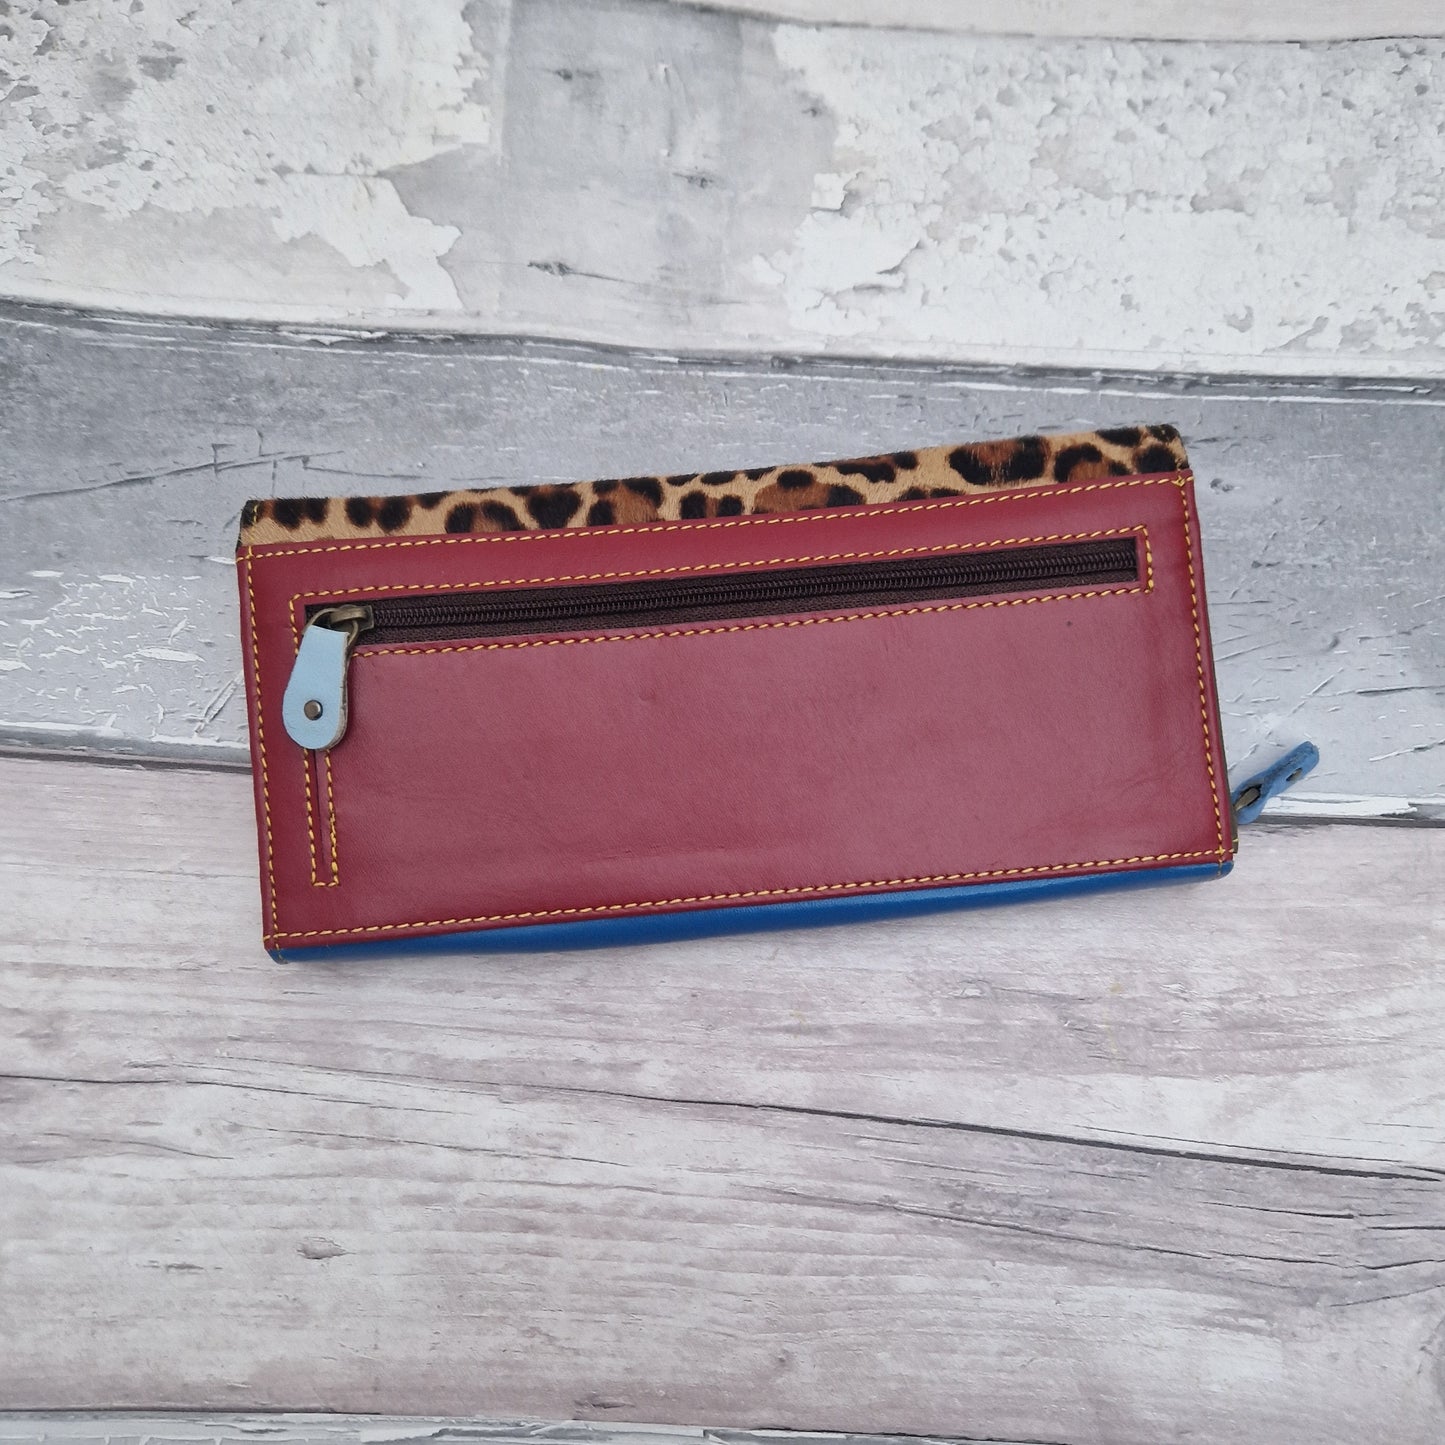 Purse made from a colourful mixture of leather off cuts.